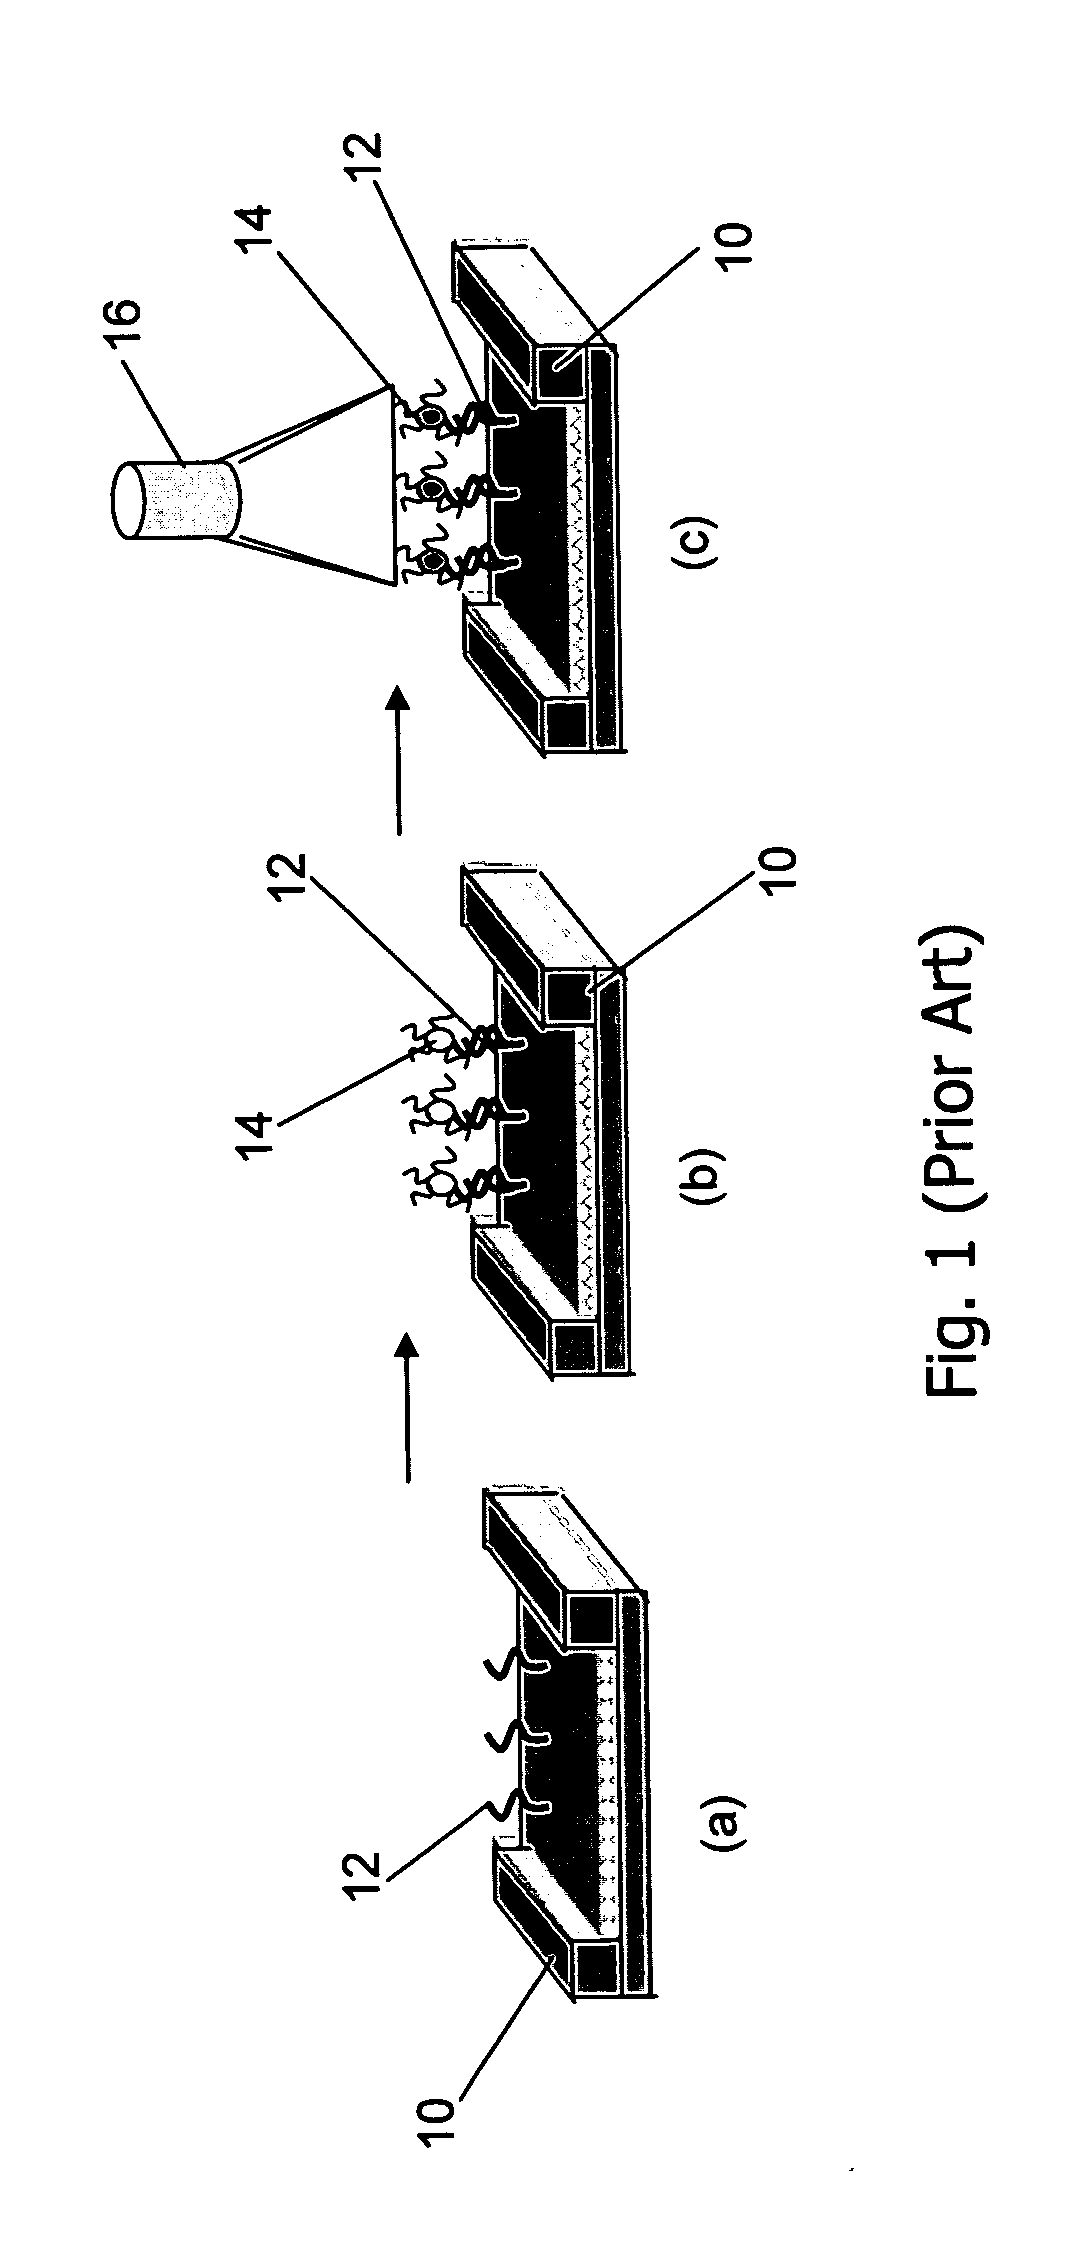 Integrated circuit optical detector for biological detection